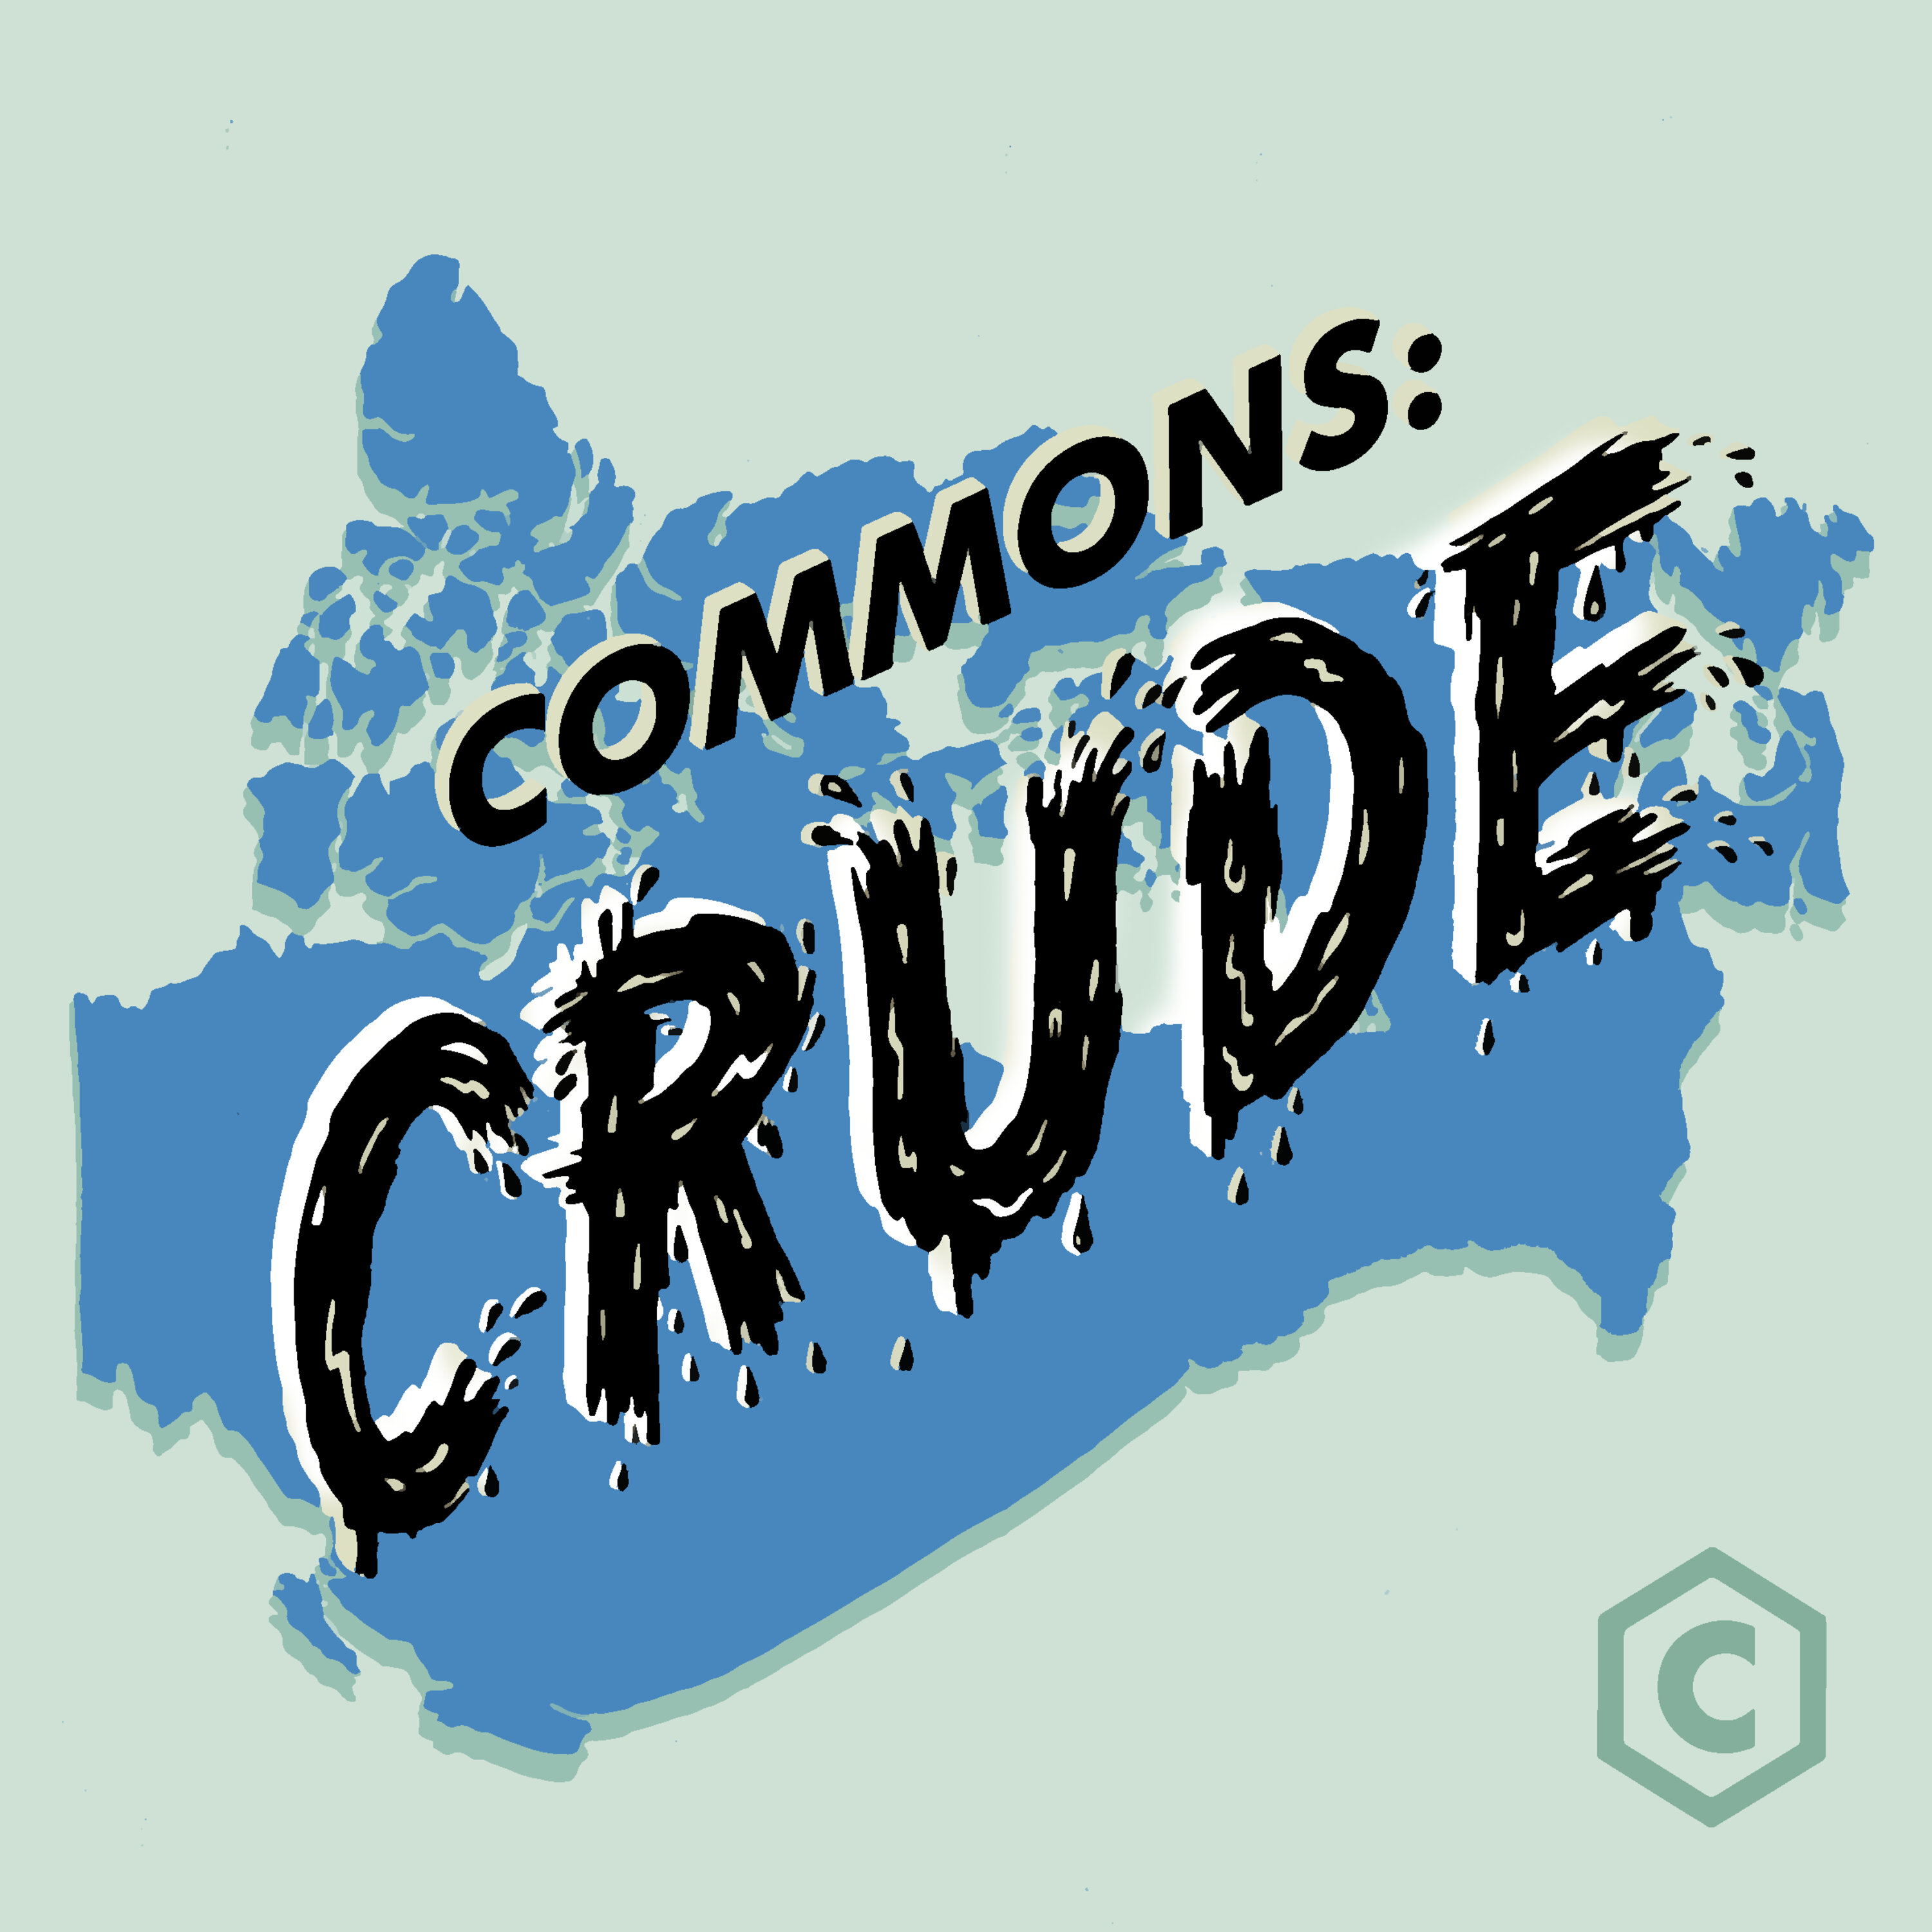 CRUDE 2 - Bombs, Blood & the Battle of Trickle Creek